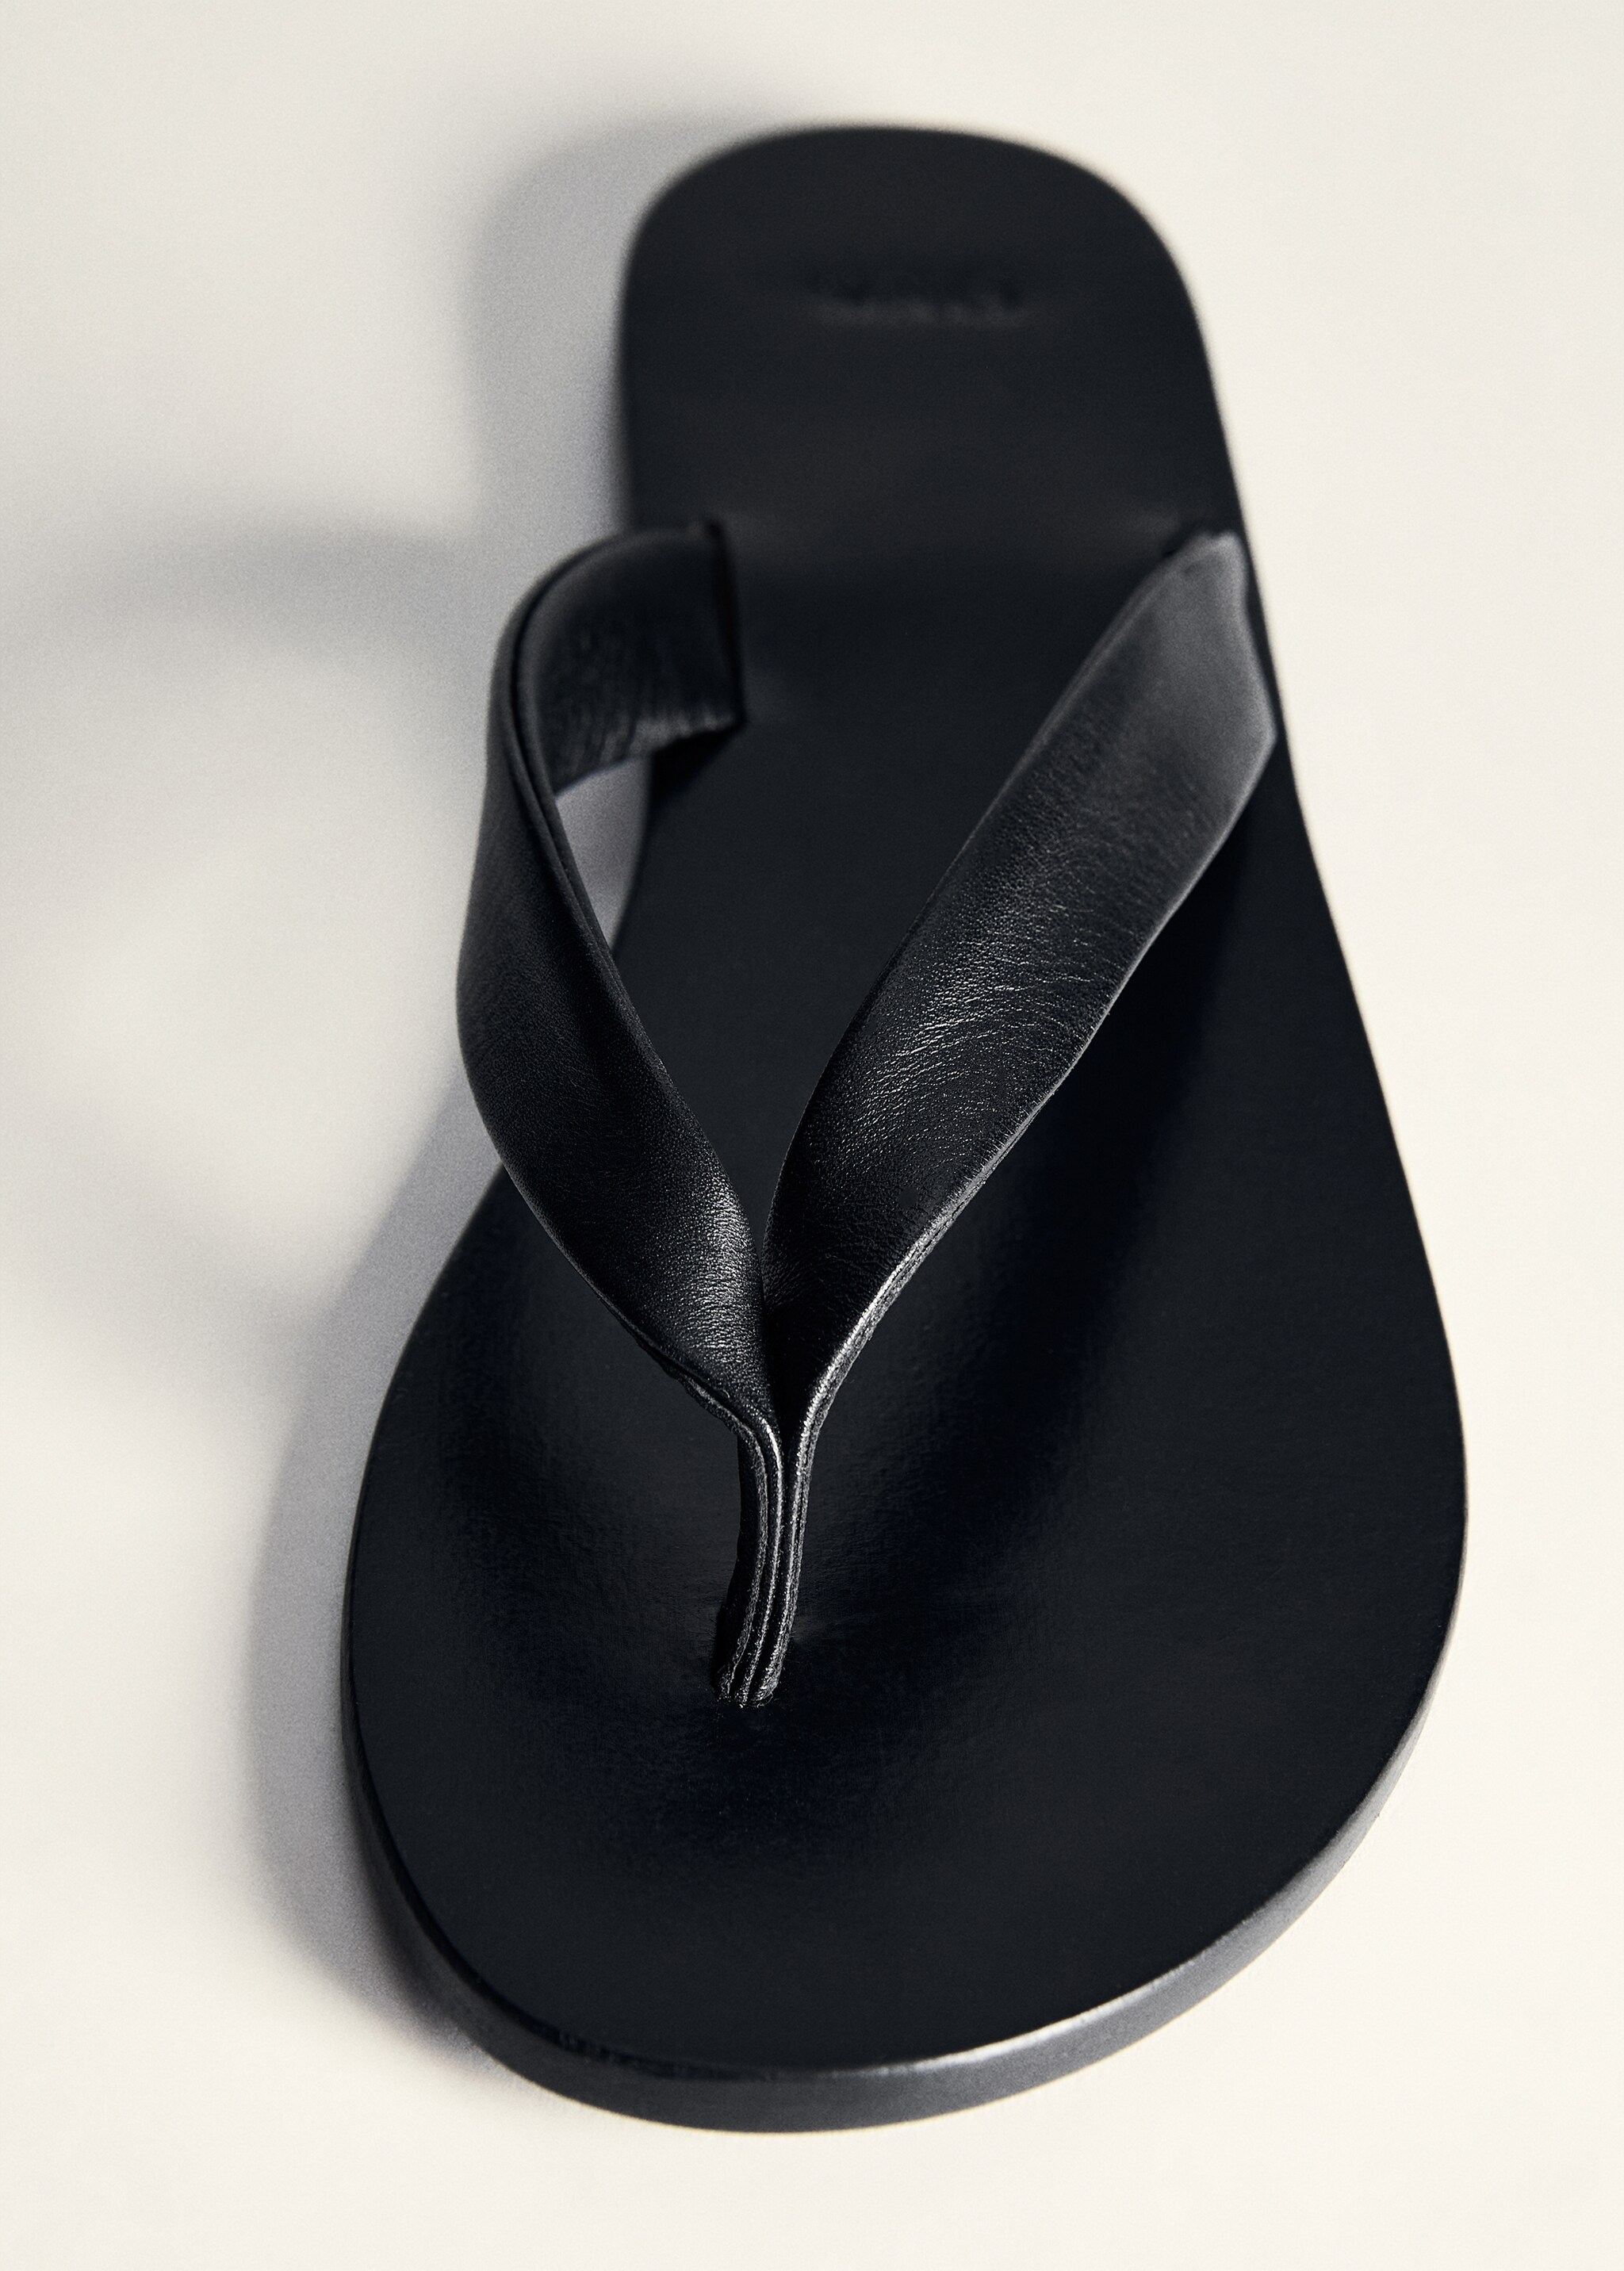 Leather straps sandals - Details of the article 5